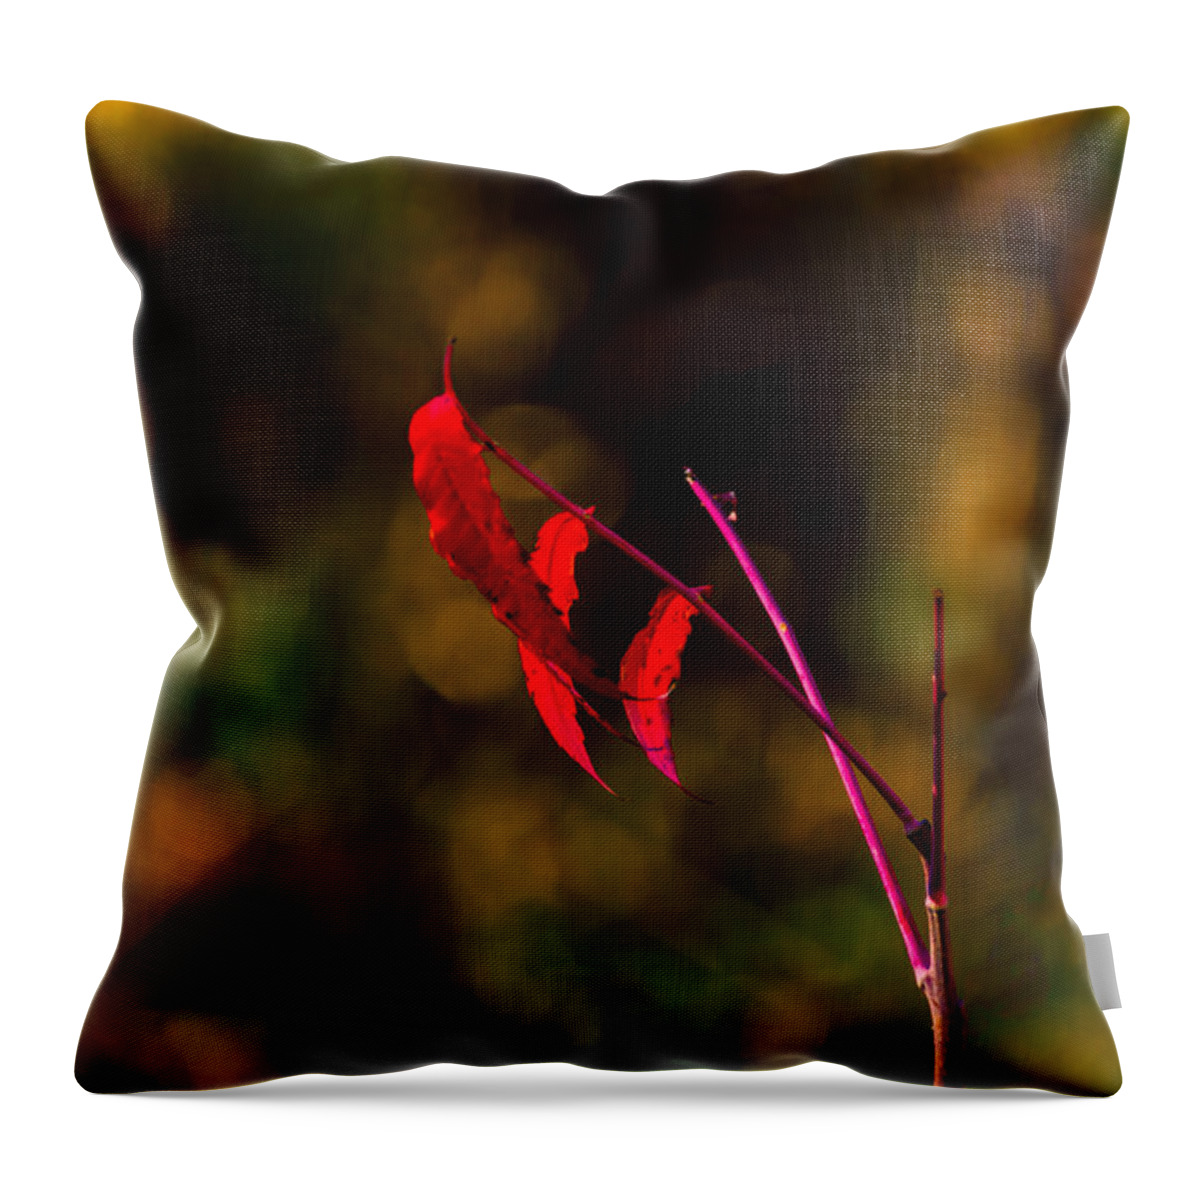 Jay Stockhaus Throw Pillow featuring the photograph Red Leaves by Jay Stockhaus